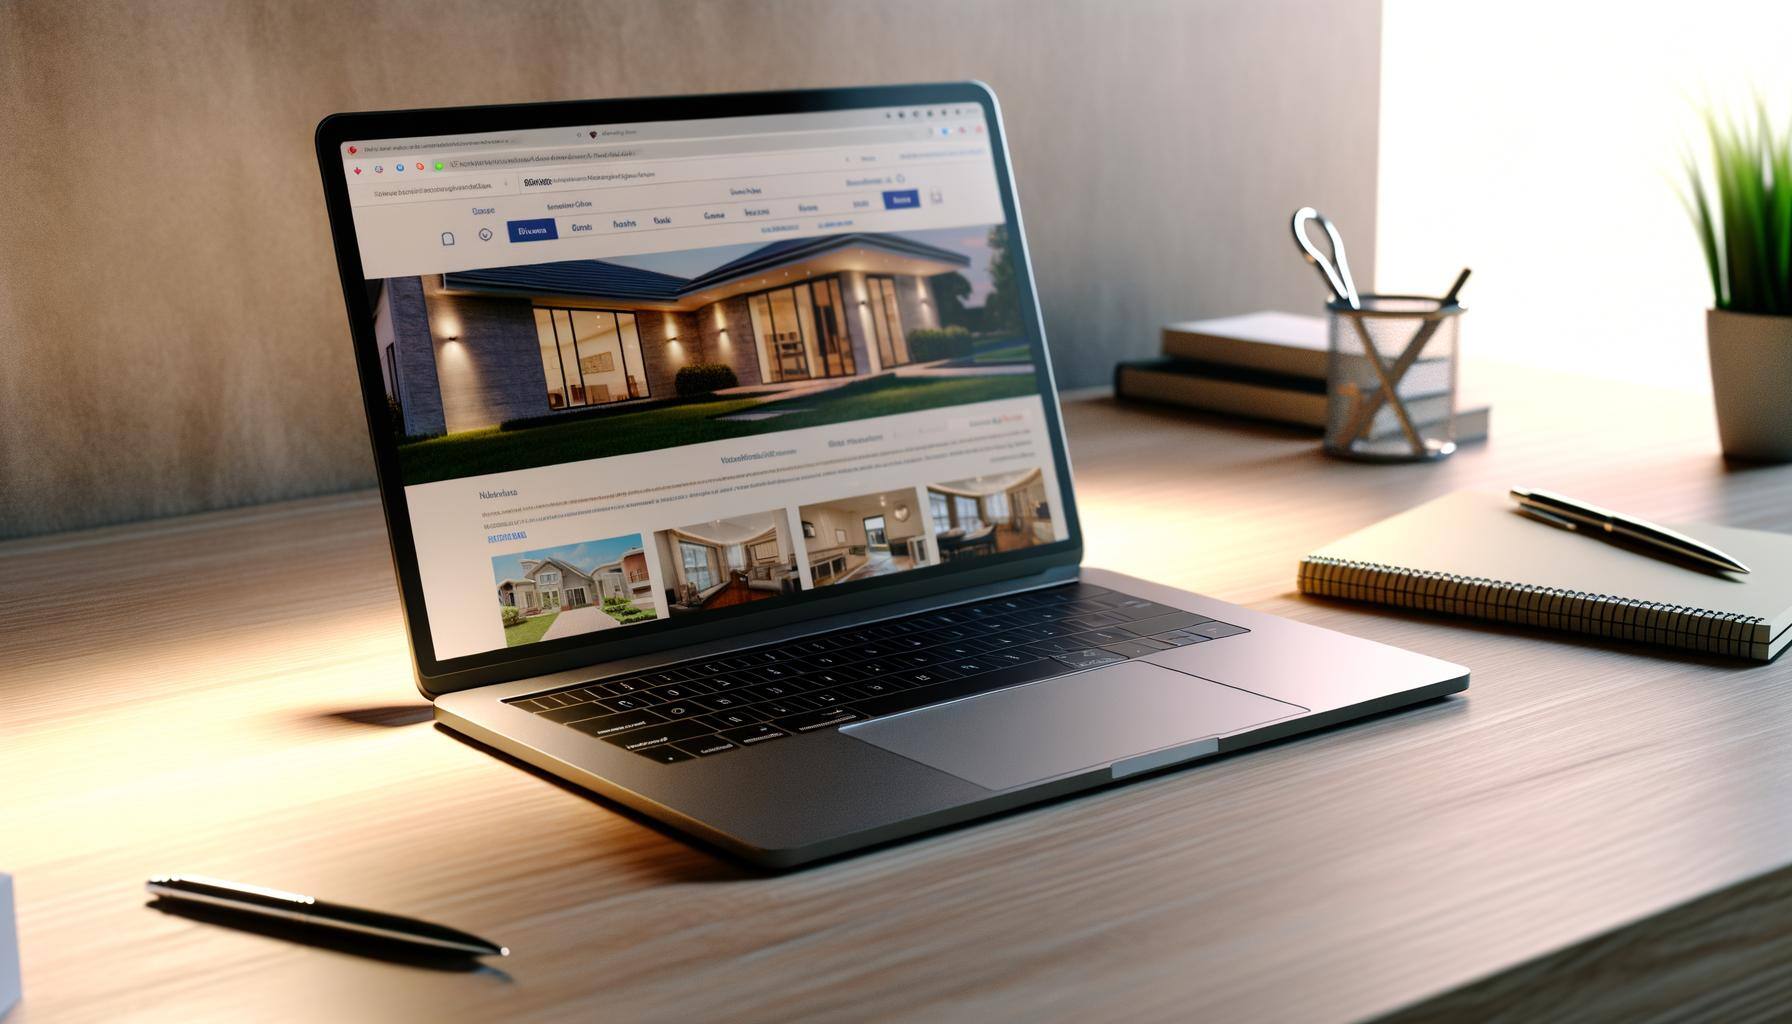 Real estate website being shown on a laptop screen